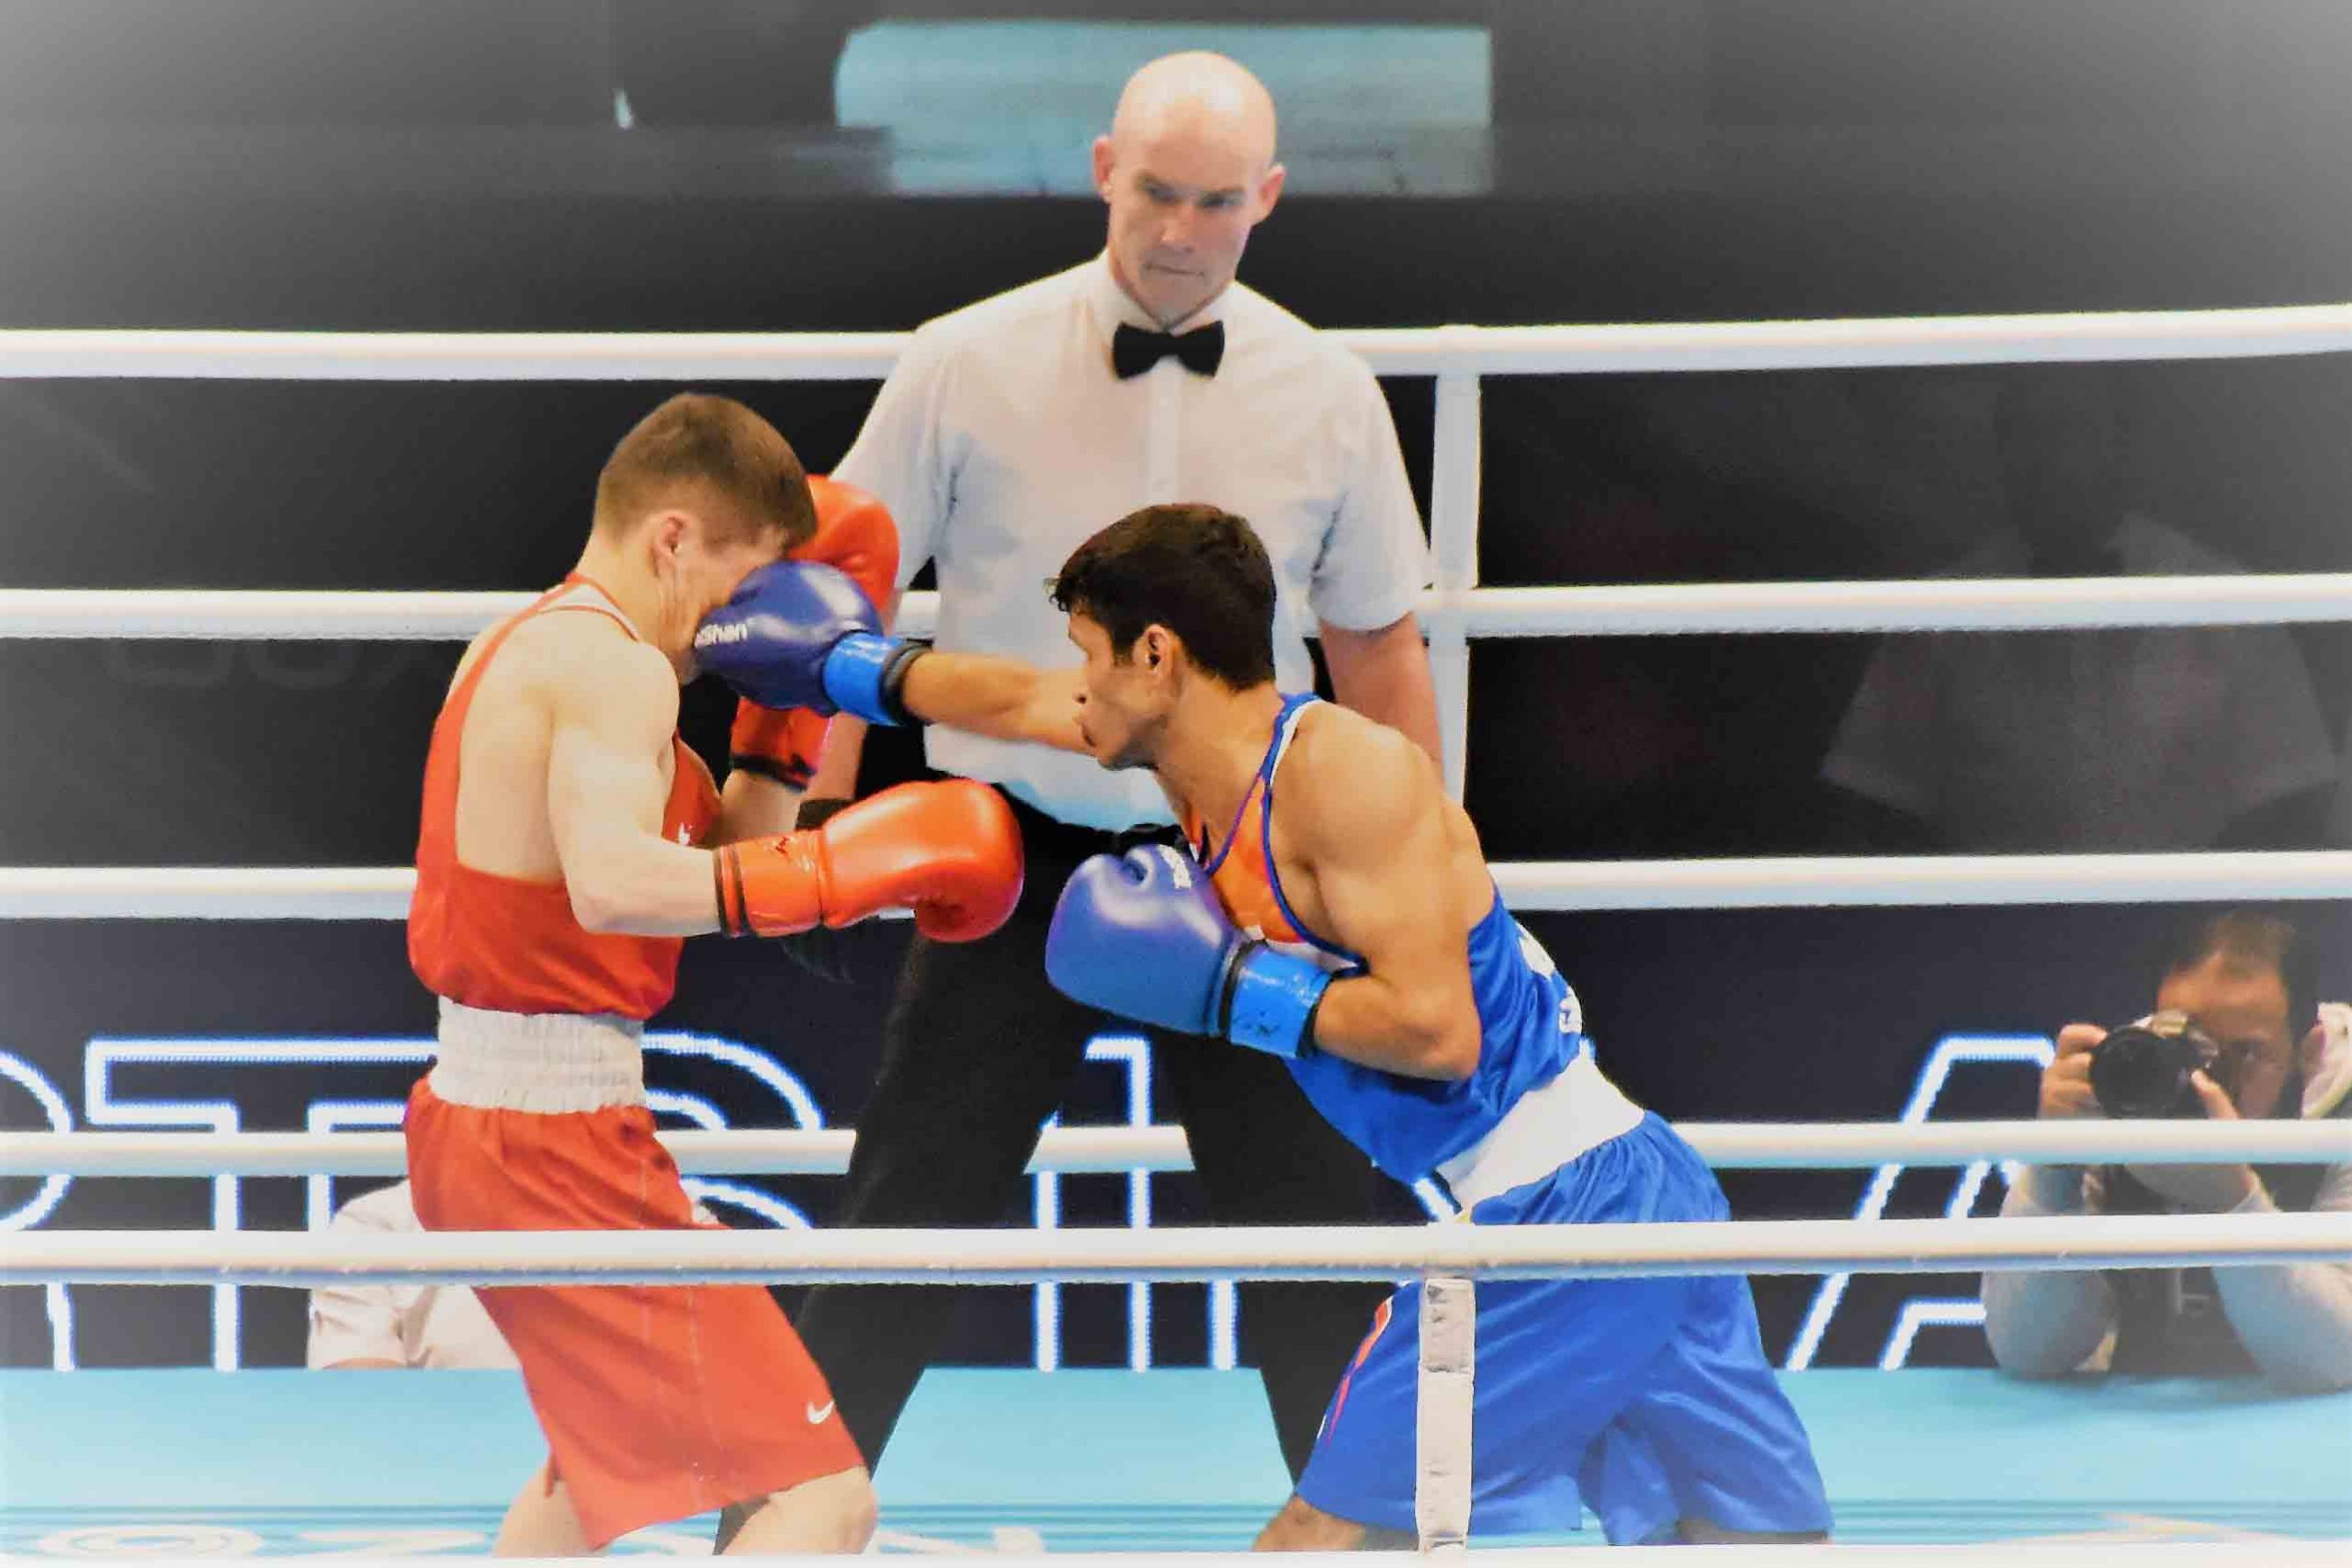 Gaurav Solanki in action on day 1 as India won both the bout at the Asia Ocenia Olympic Qualifiers in Amman,Jordon on Tuesday 